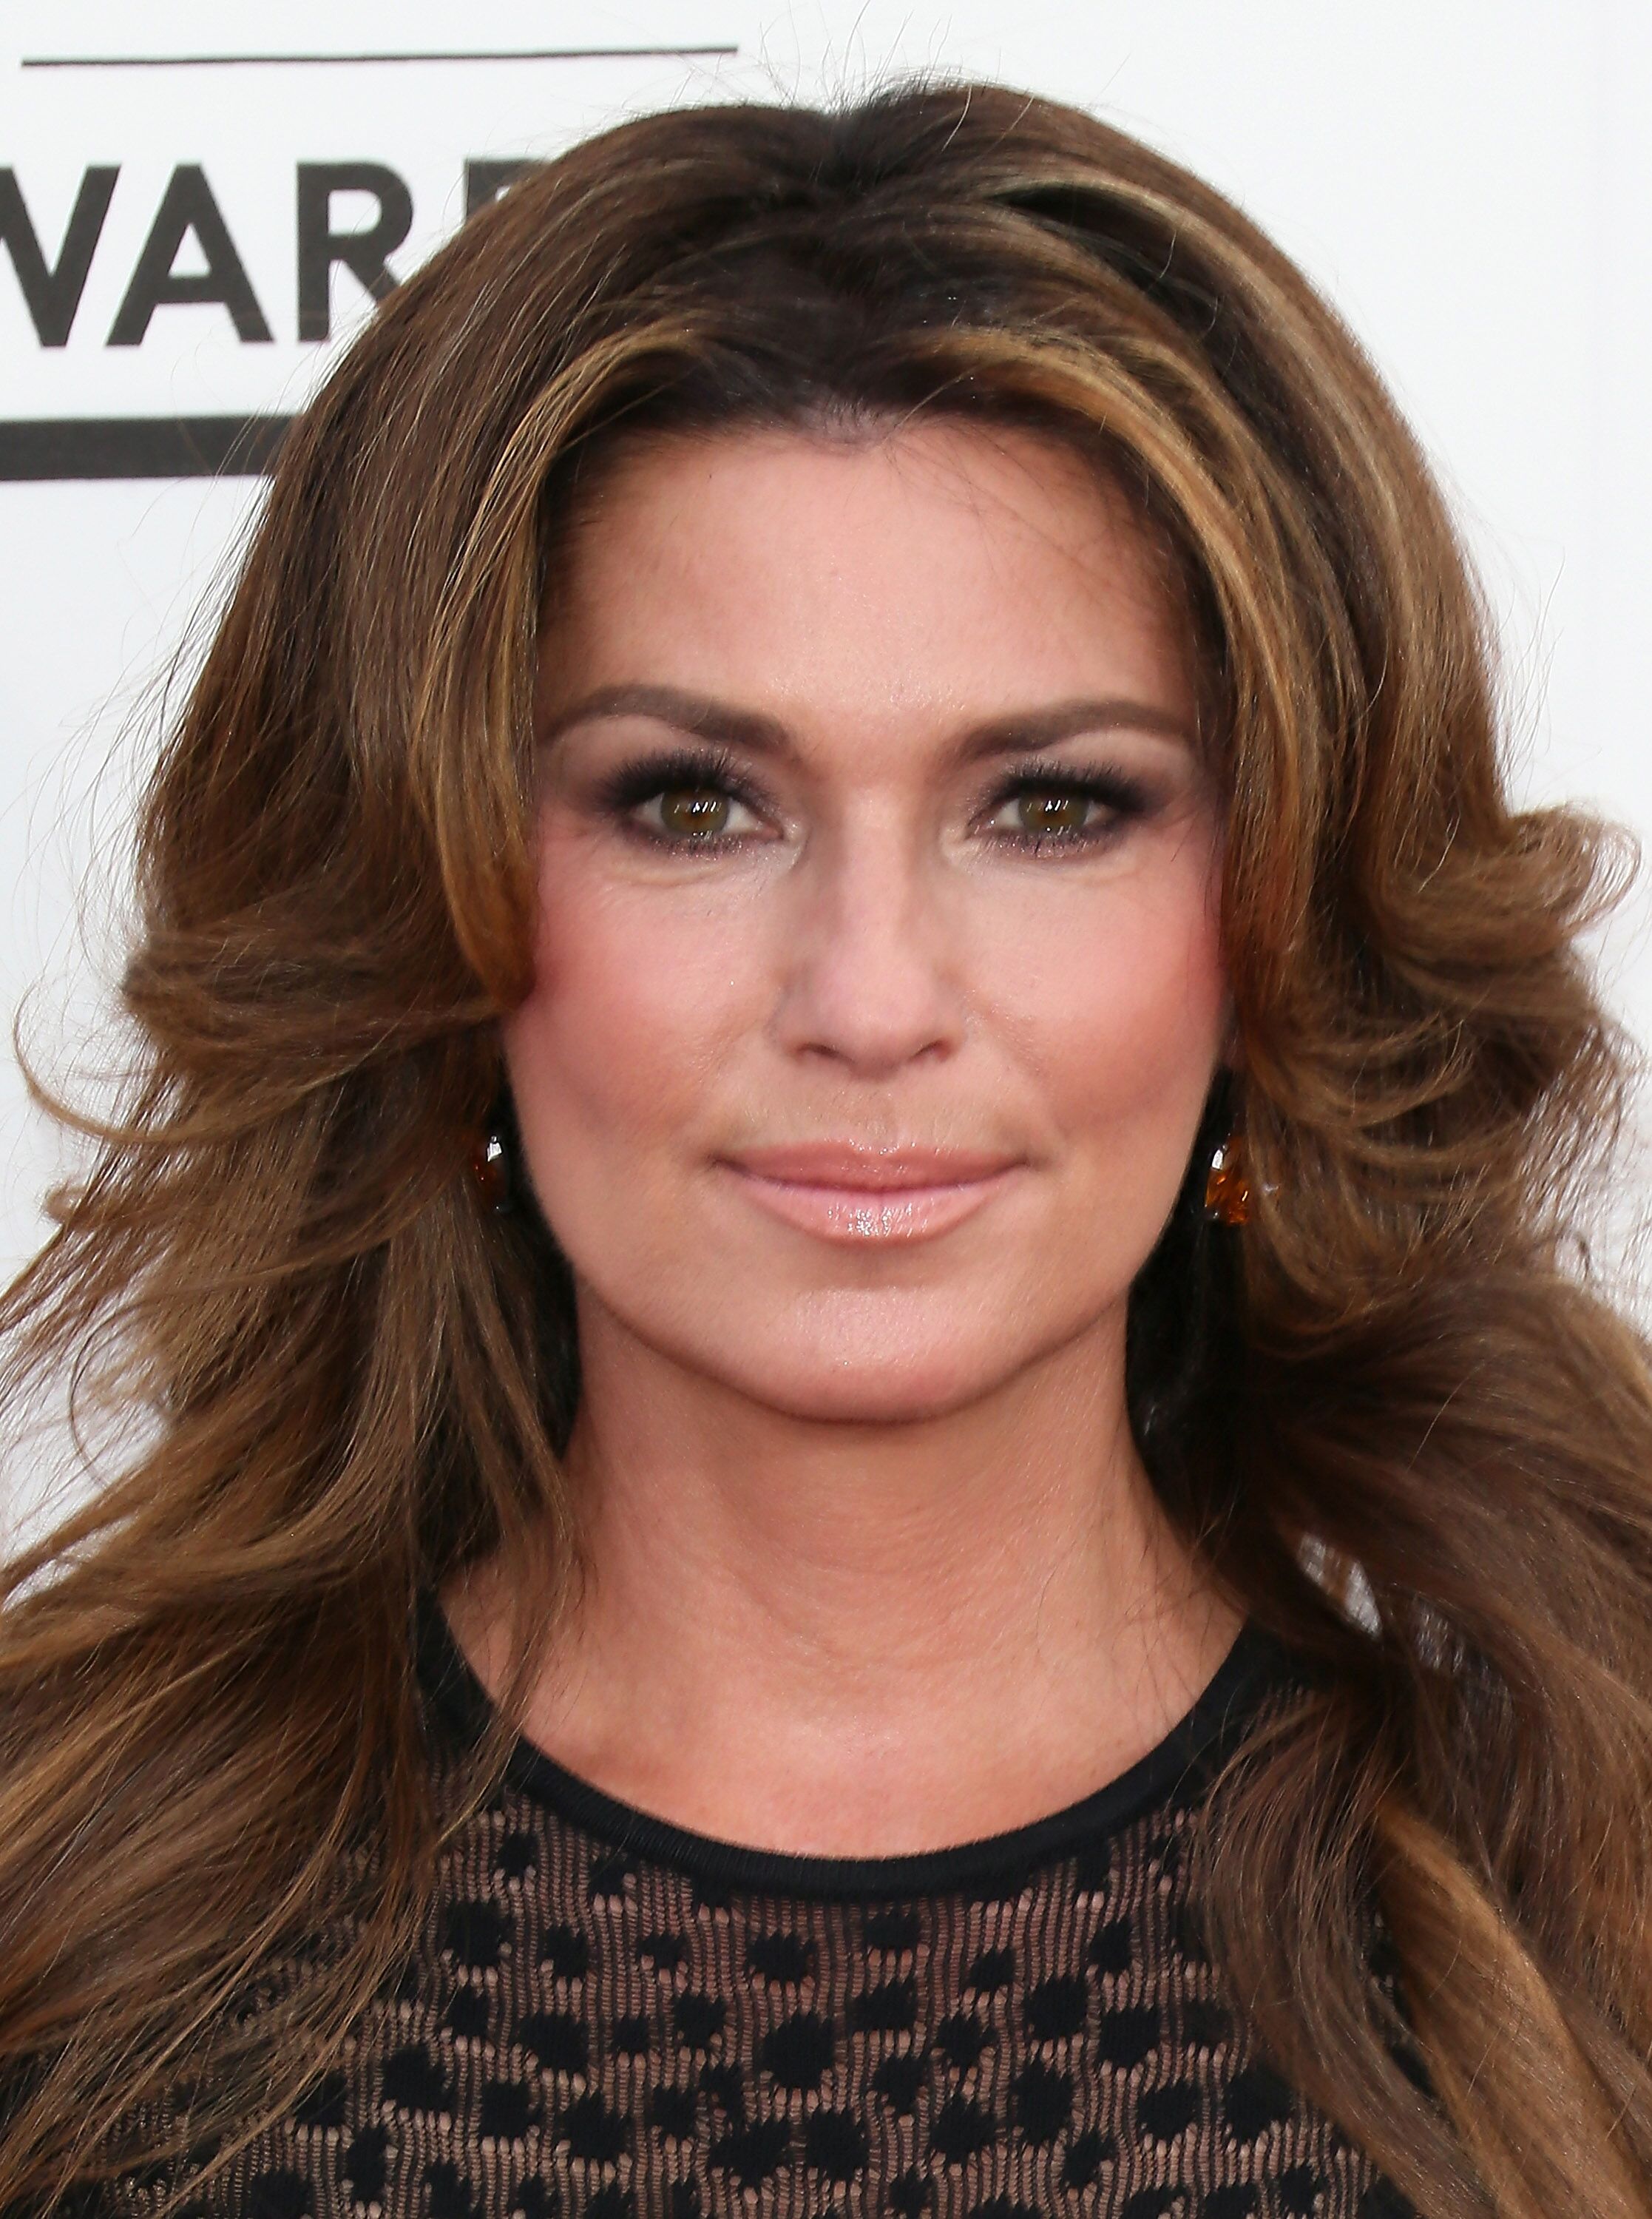 Shania Twain attends the 2014 Billboard Music Awards. | Source: Getty Images